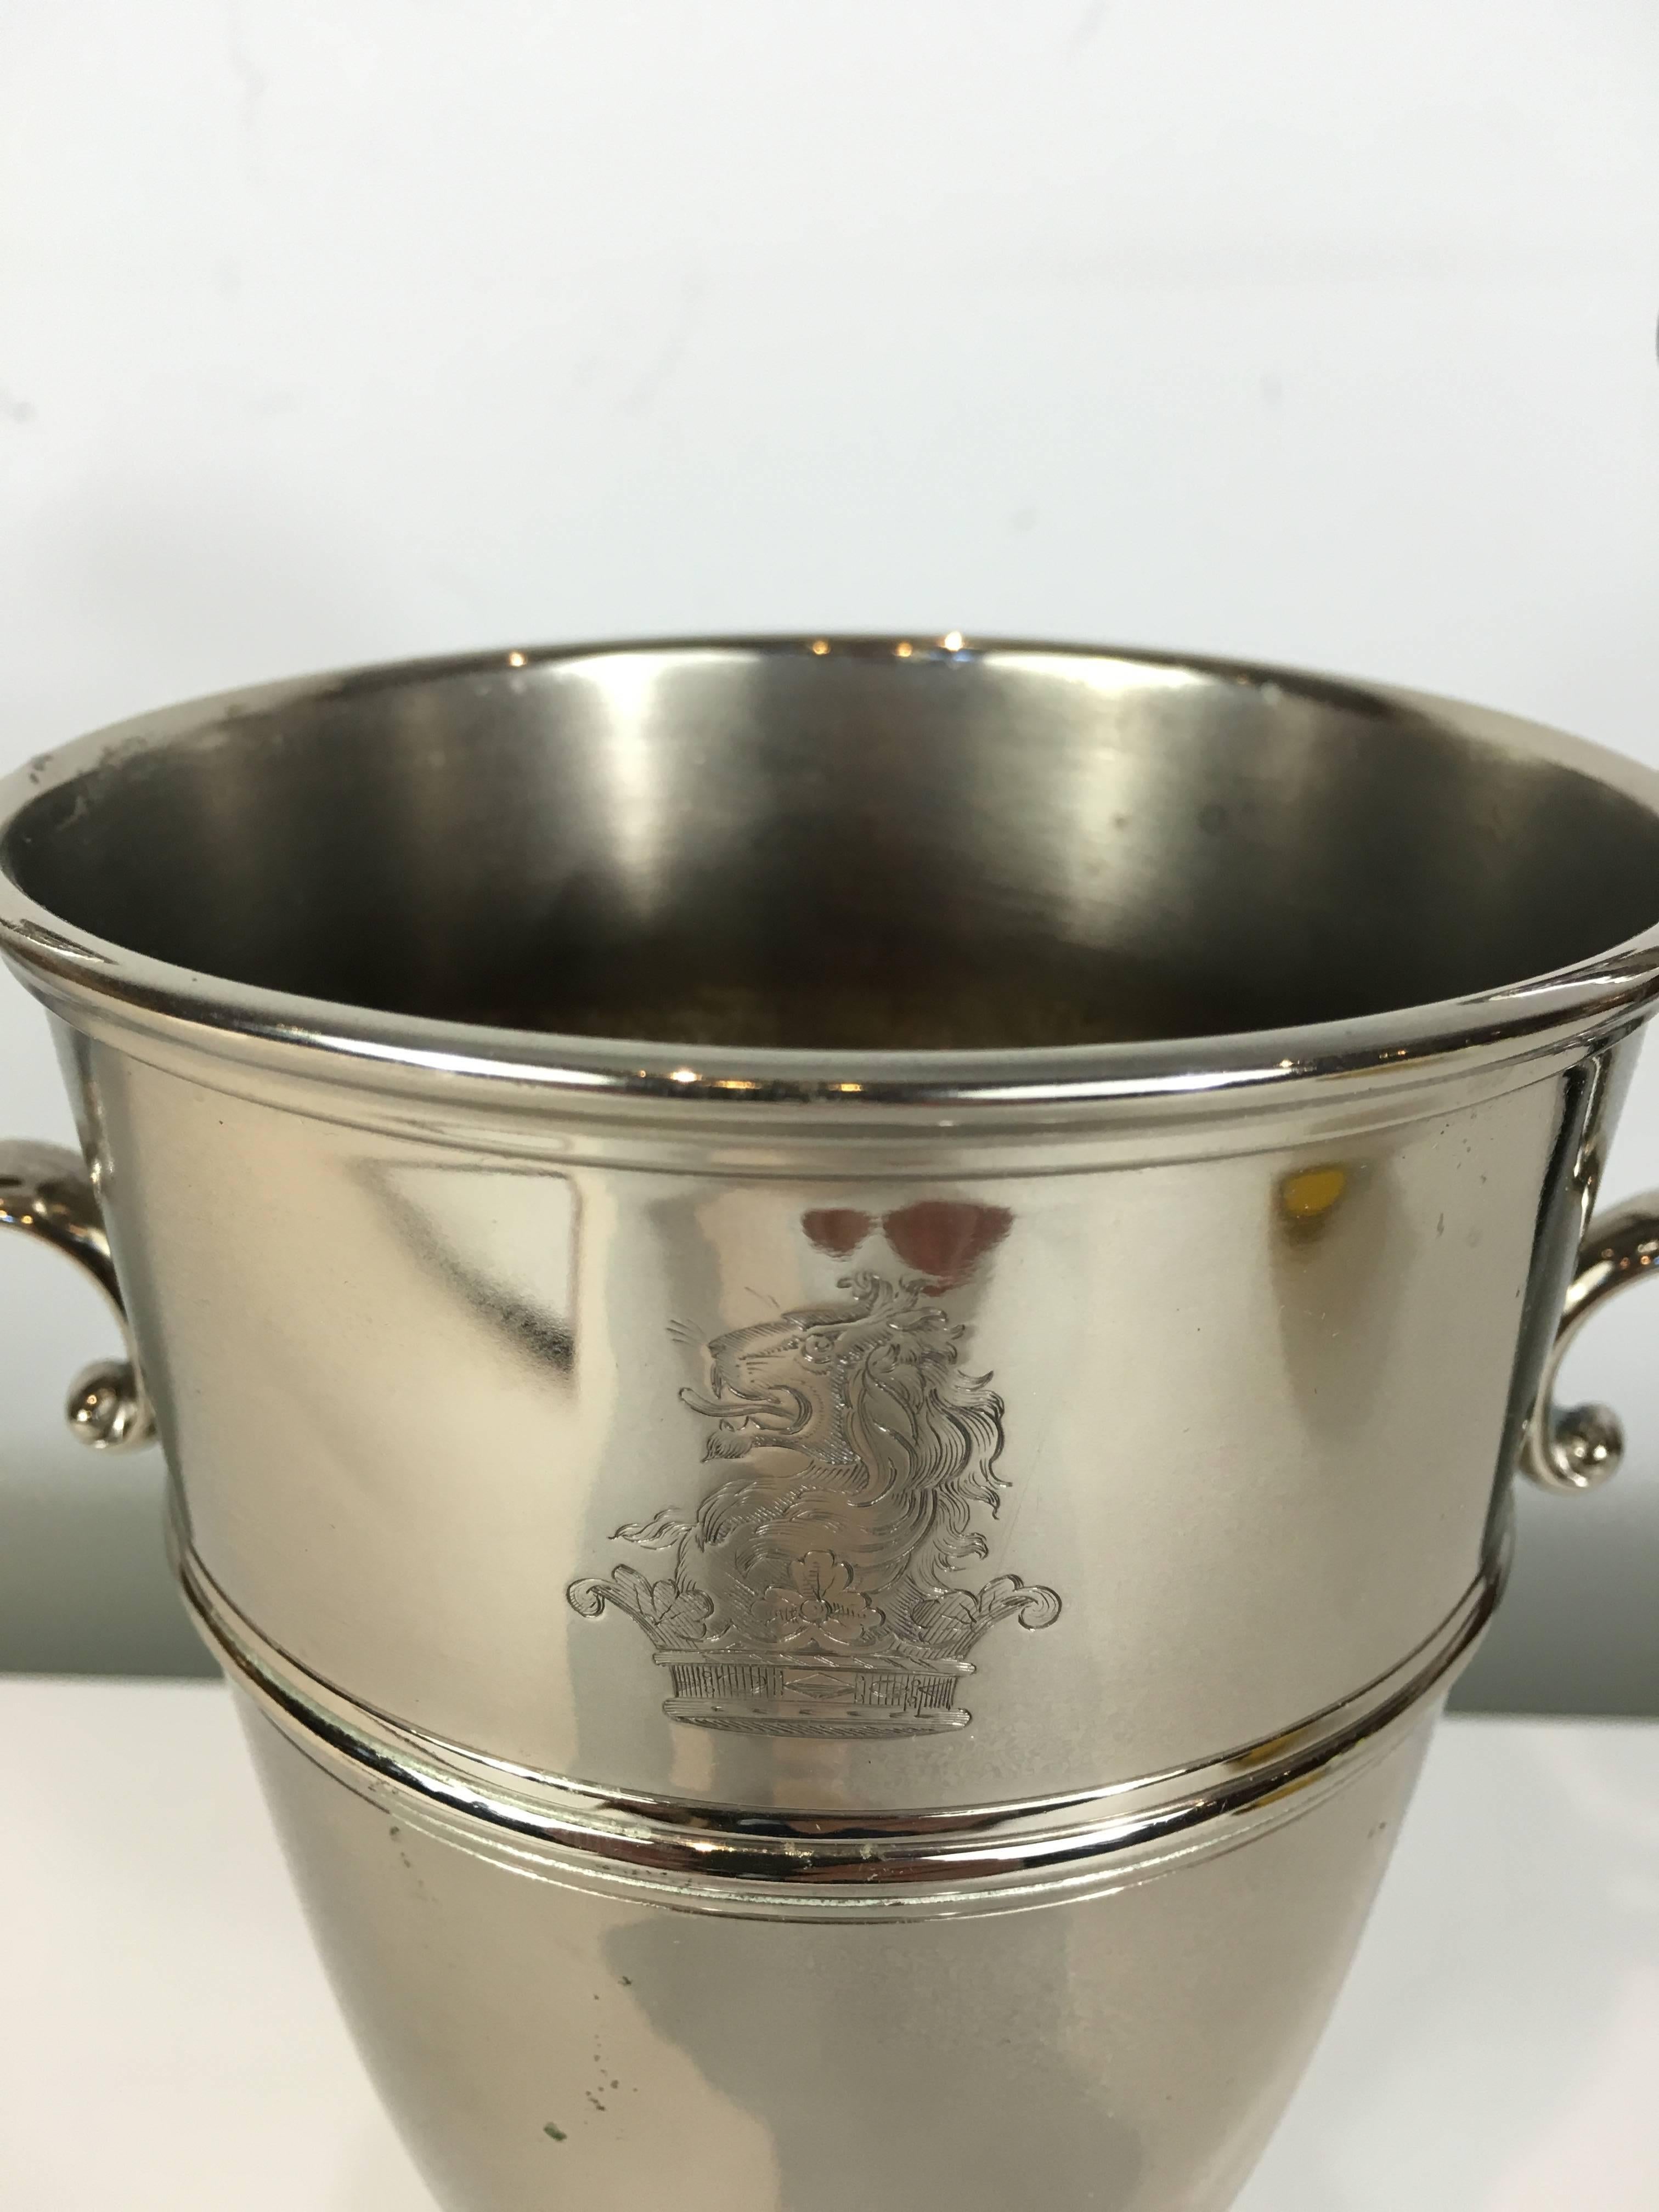 Sheffield plate armorial crested loving cup, of typical form with lion and crown crest.